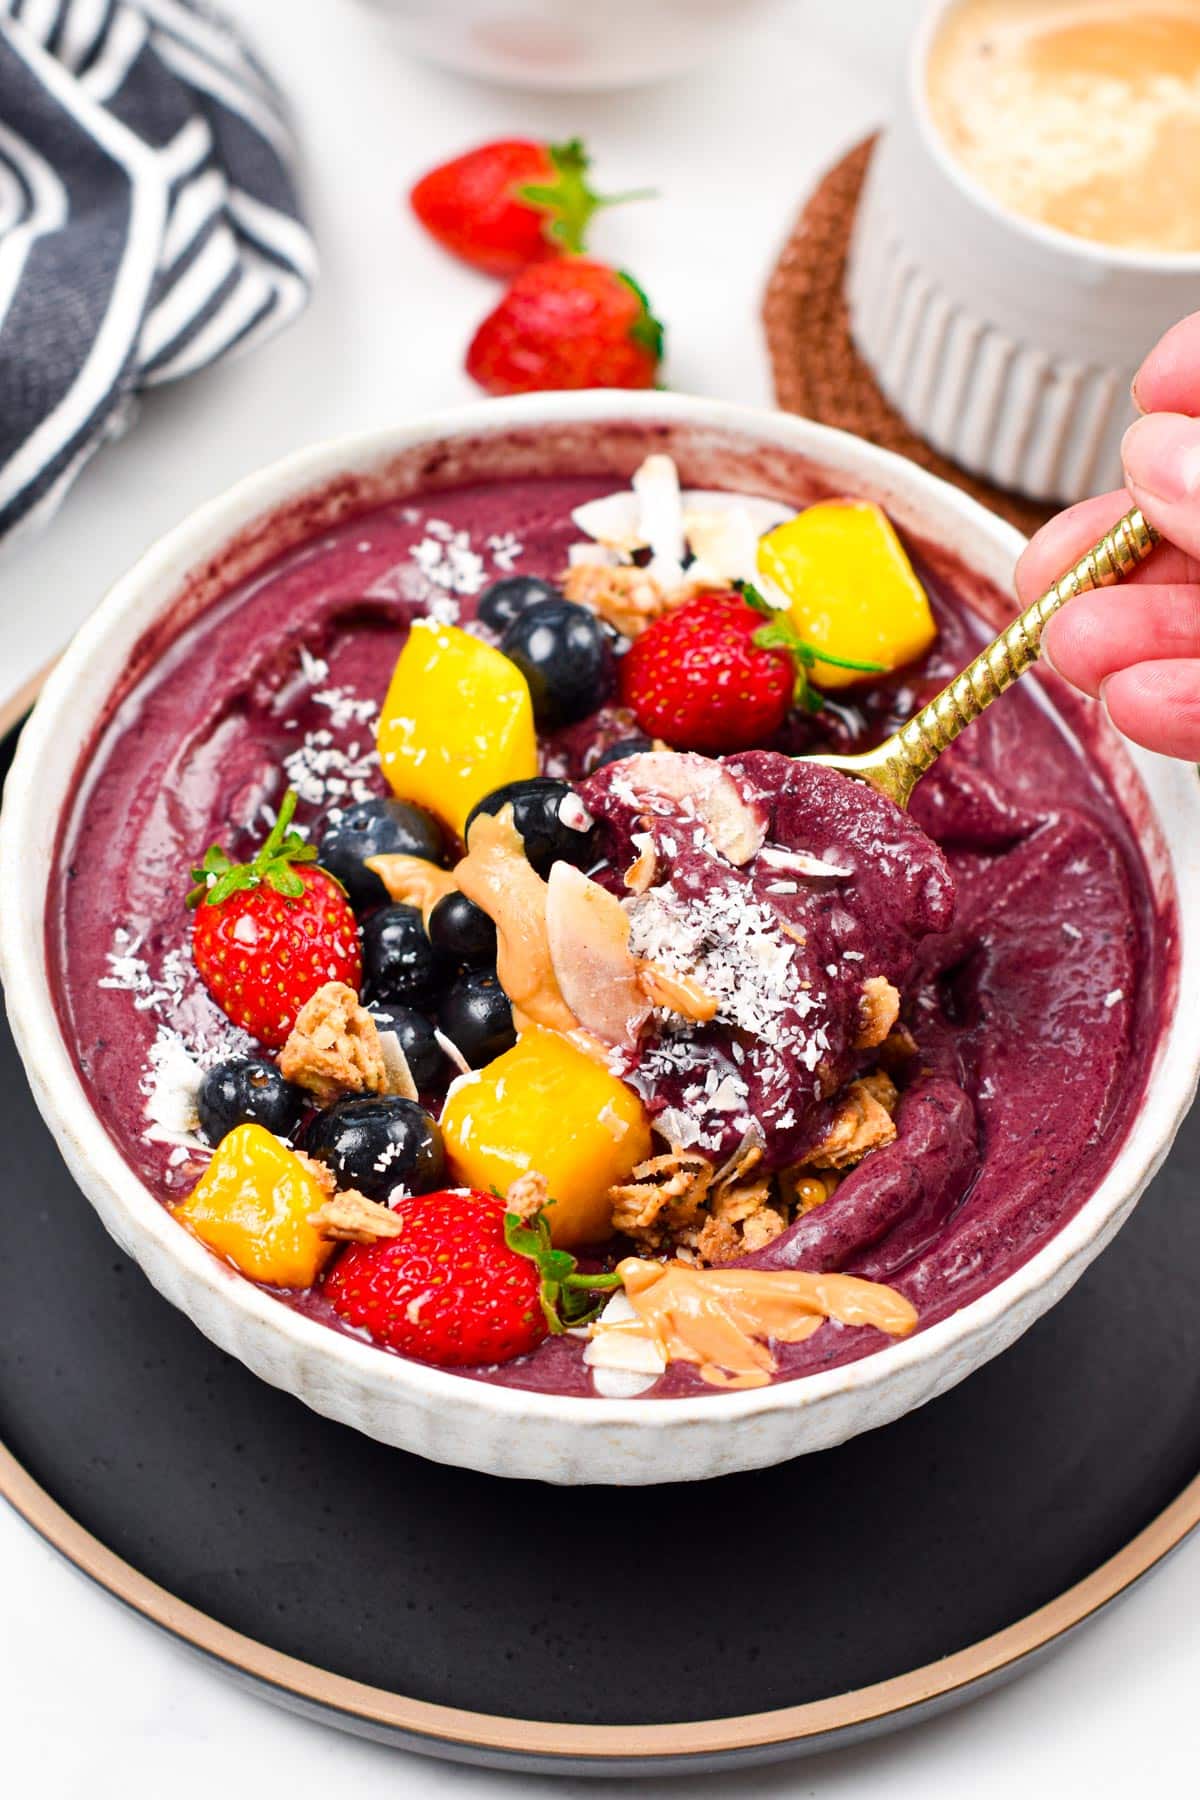 This Acai Bowl recipe is a creamy refreshing smoothie bowl packed with anti-oxidants and vitamin C. Plus, it takes barely 5 minutes to prepare this easy healthy breakfast and it's also naturally vegan and gluten-free.This Acai Bowl recipe is a creamy refreshing smoothie bowl packed with anti-oxidants and vitamin C. Plus, it takes barely 5 minutes to prepare this easy healthy breakfast and it's also naturally vegan and gluten-free.